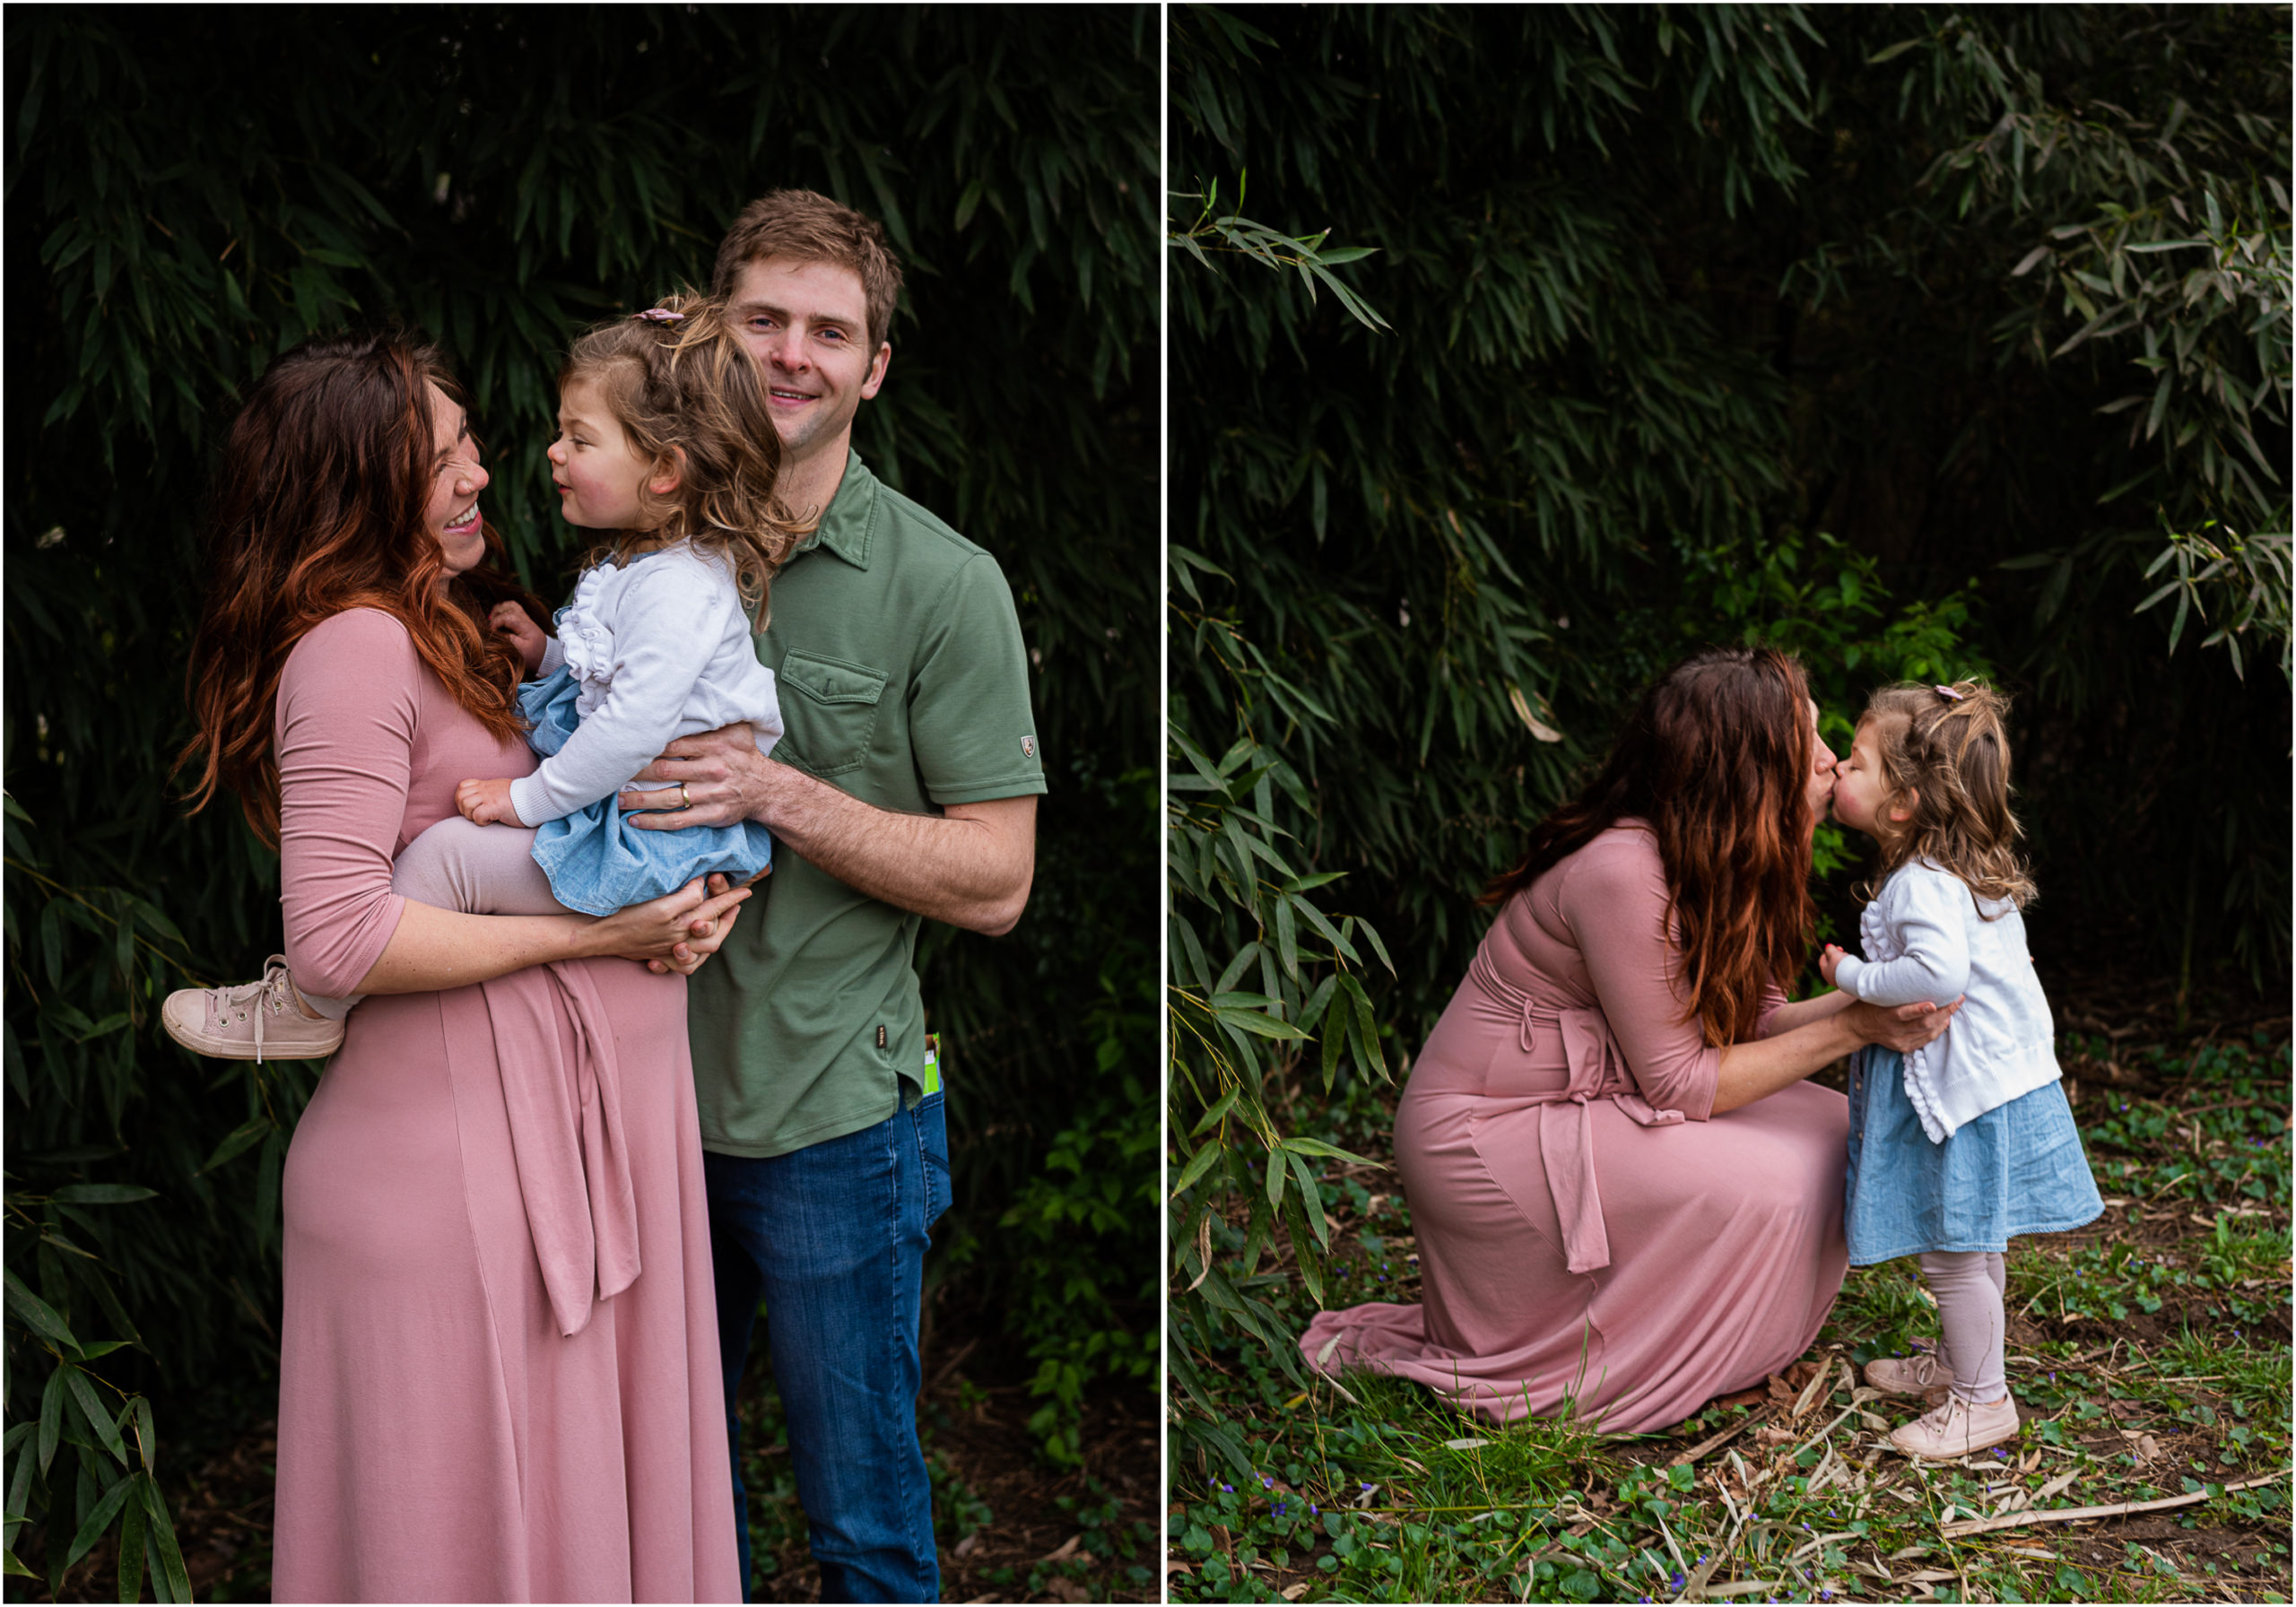 Maternity photos with a woman and her family in a lush green garden.